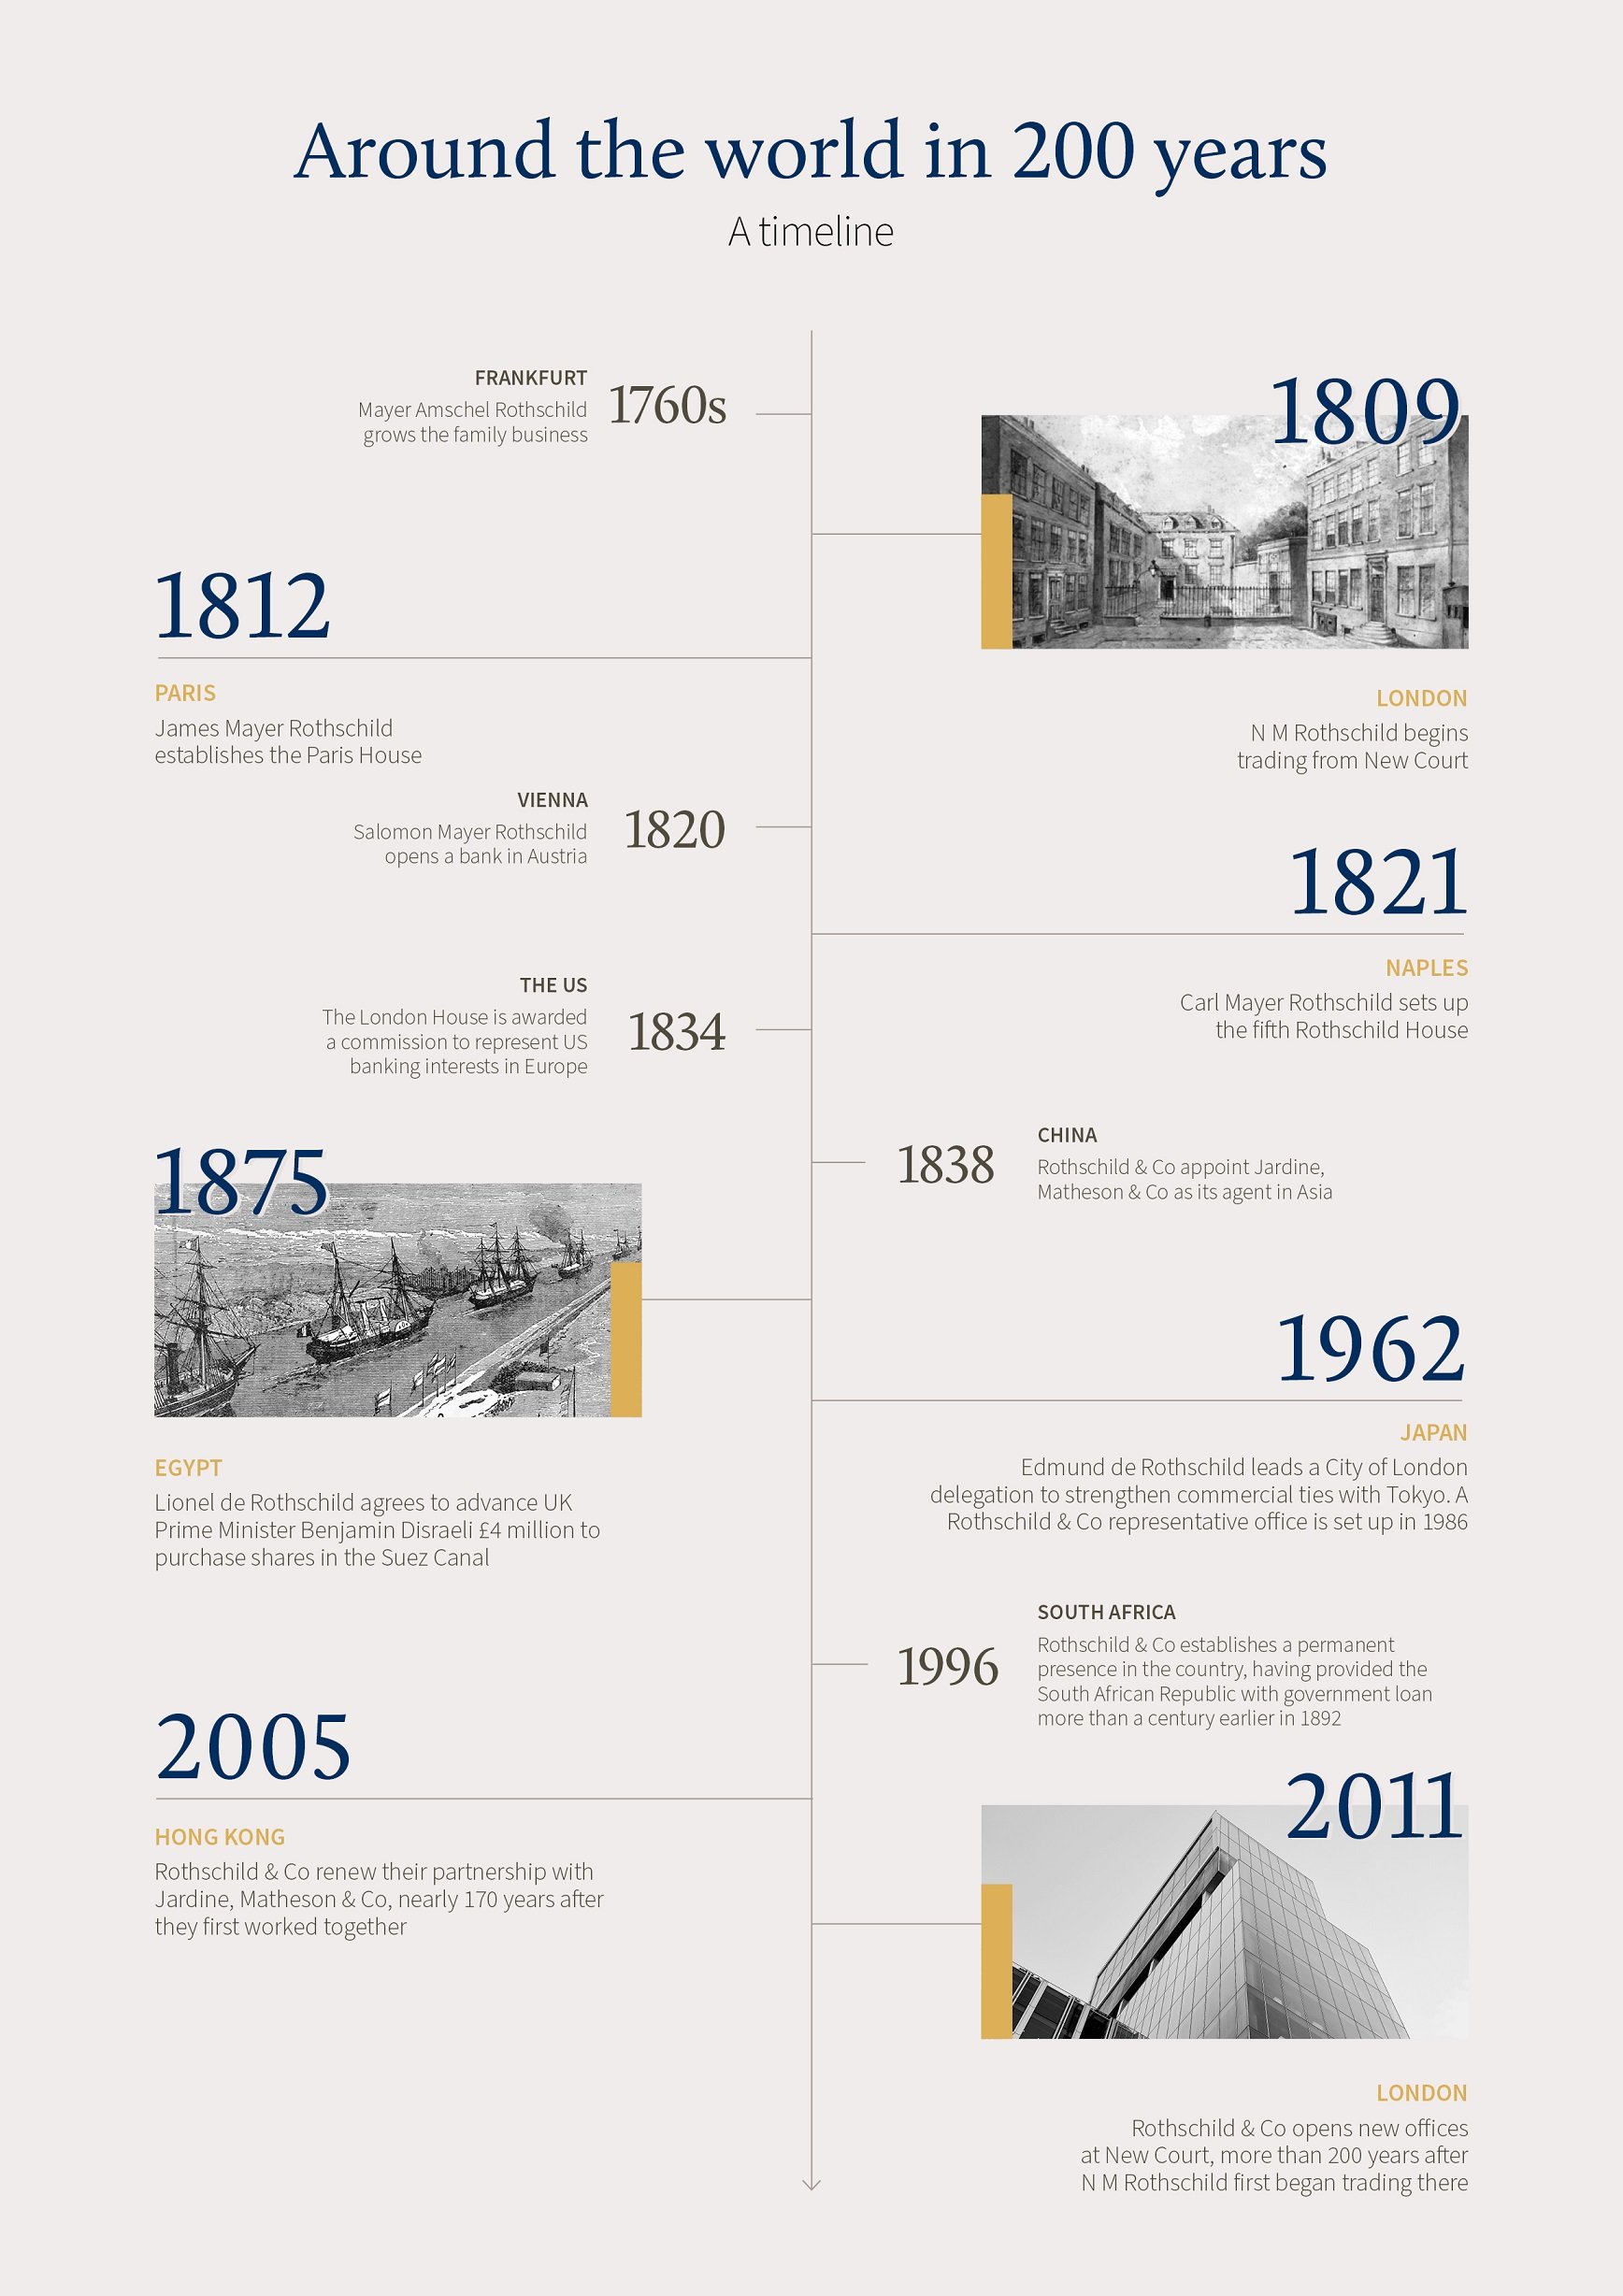 A Rothschild & Co Timeline of key historical milestones from across the globe.